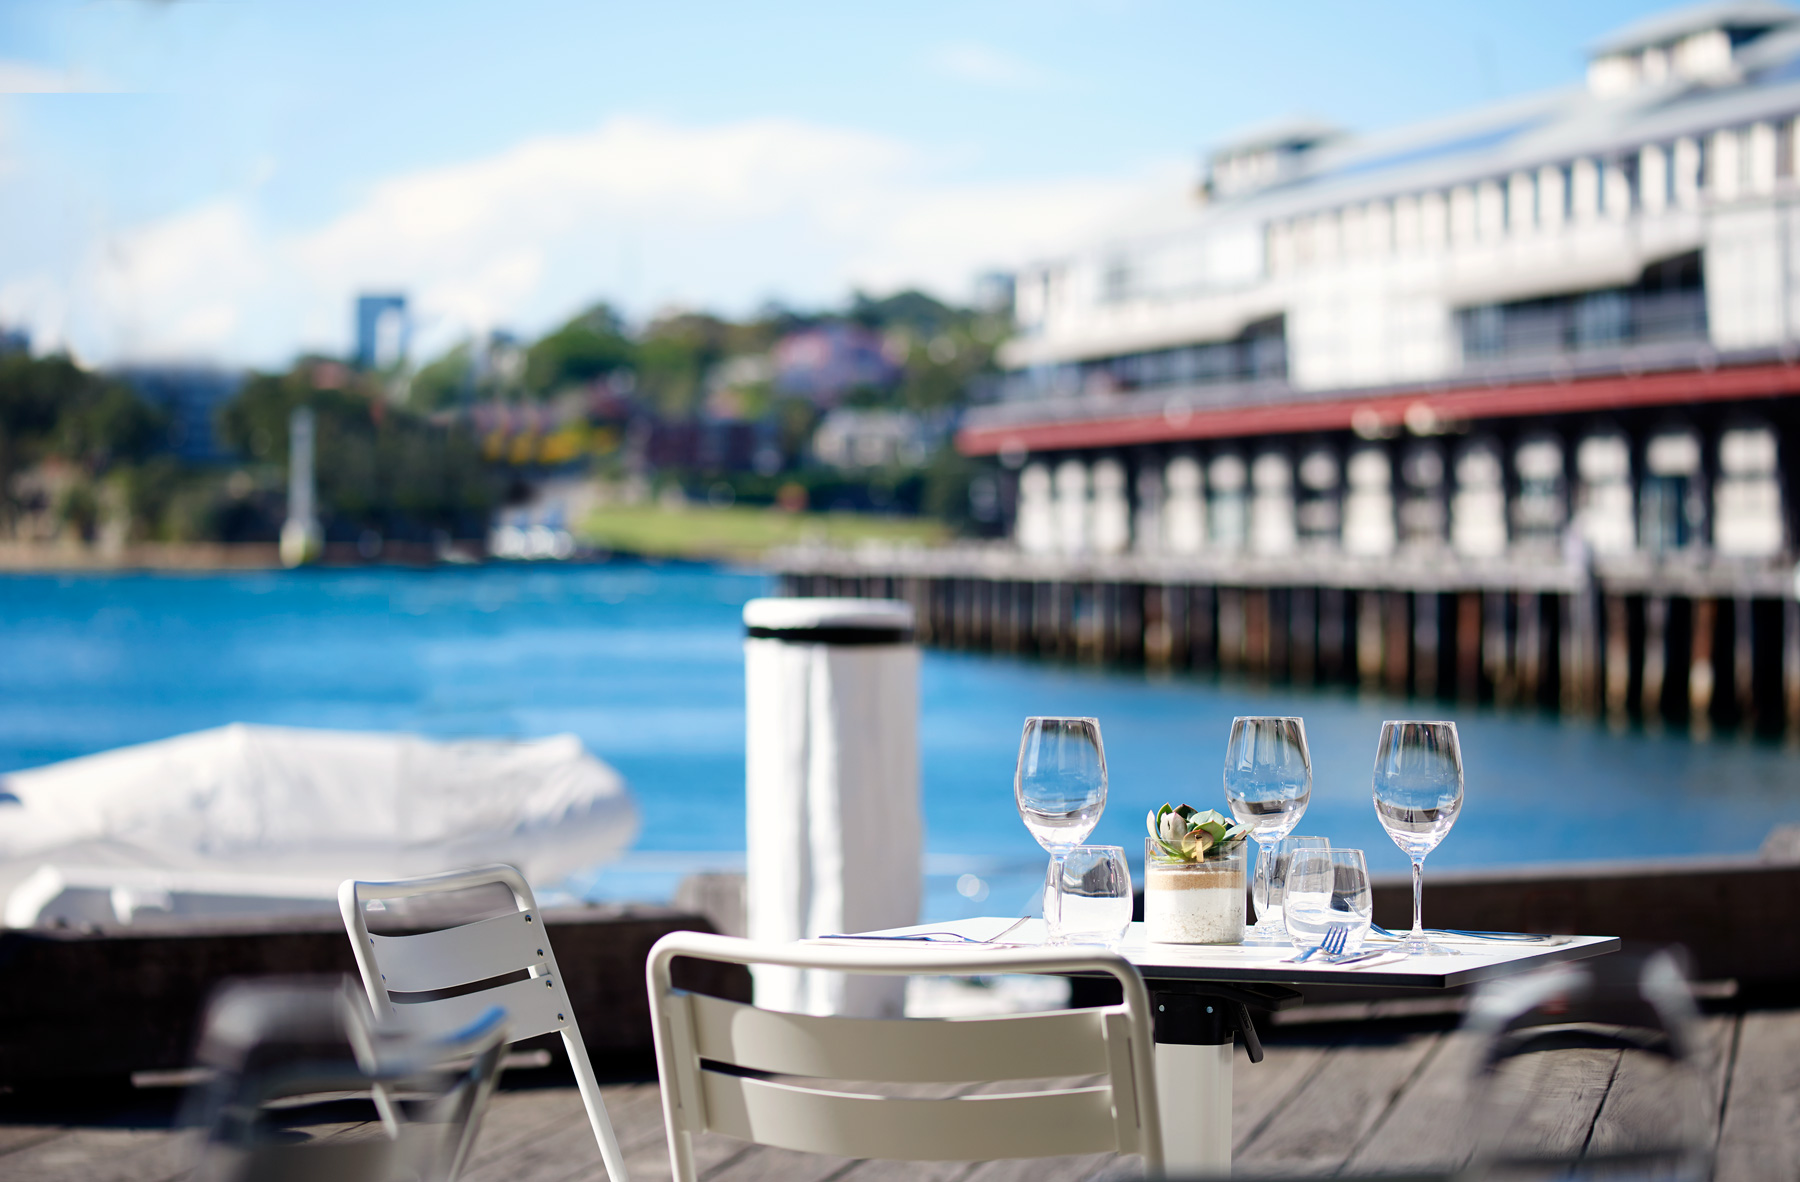 Outdoor setting with Walsh Bay in the background. Image: Supplied